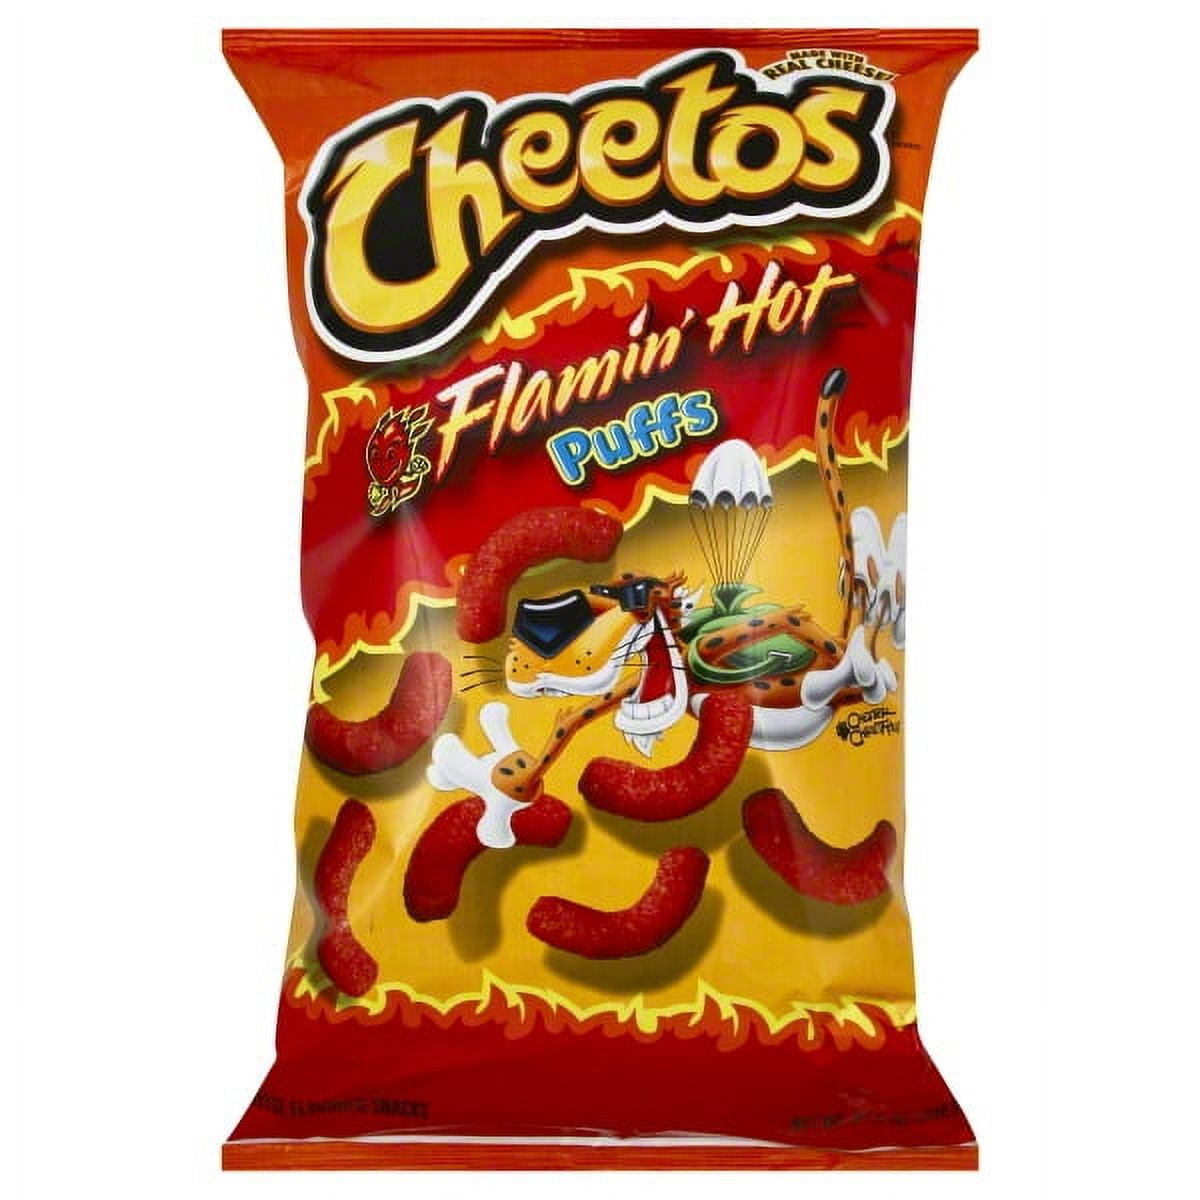 Cheetos Minis Cheddar Cheese Flavored Snacks, 3.6 oz